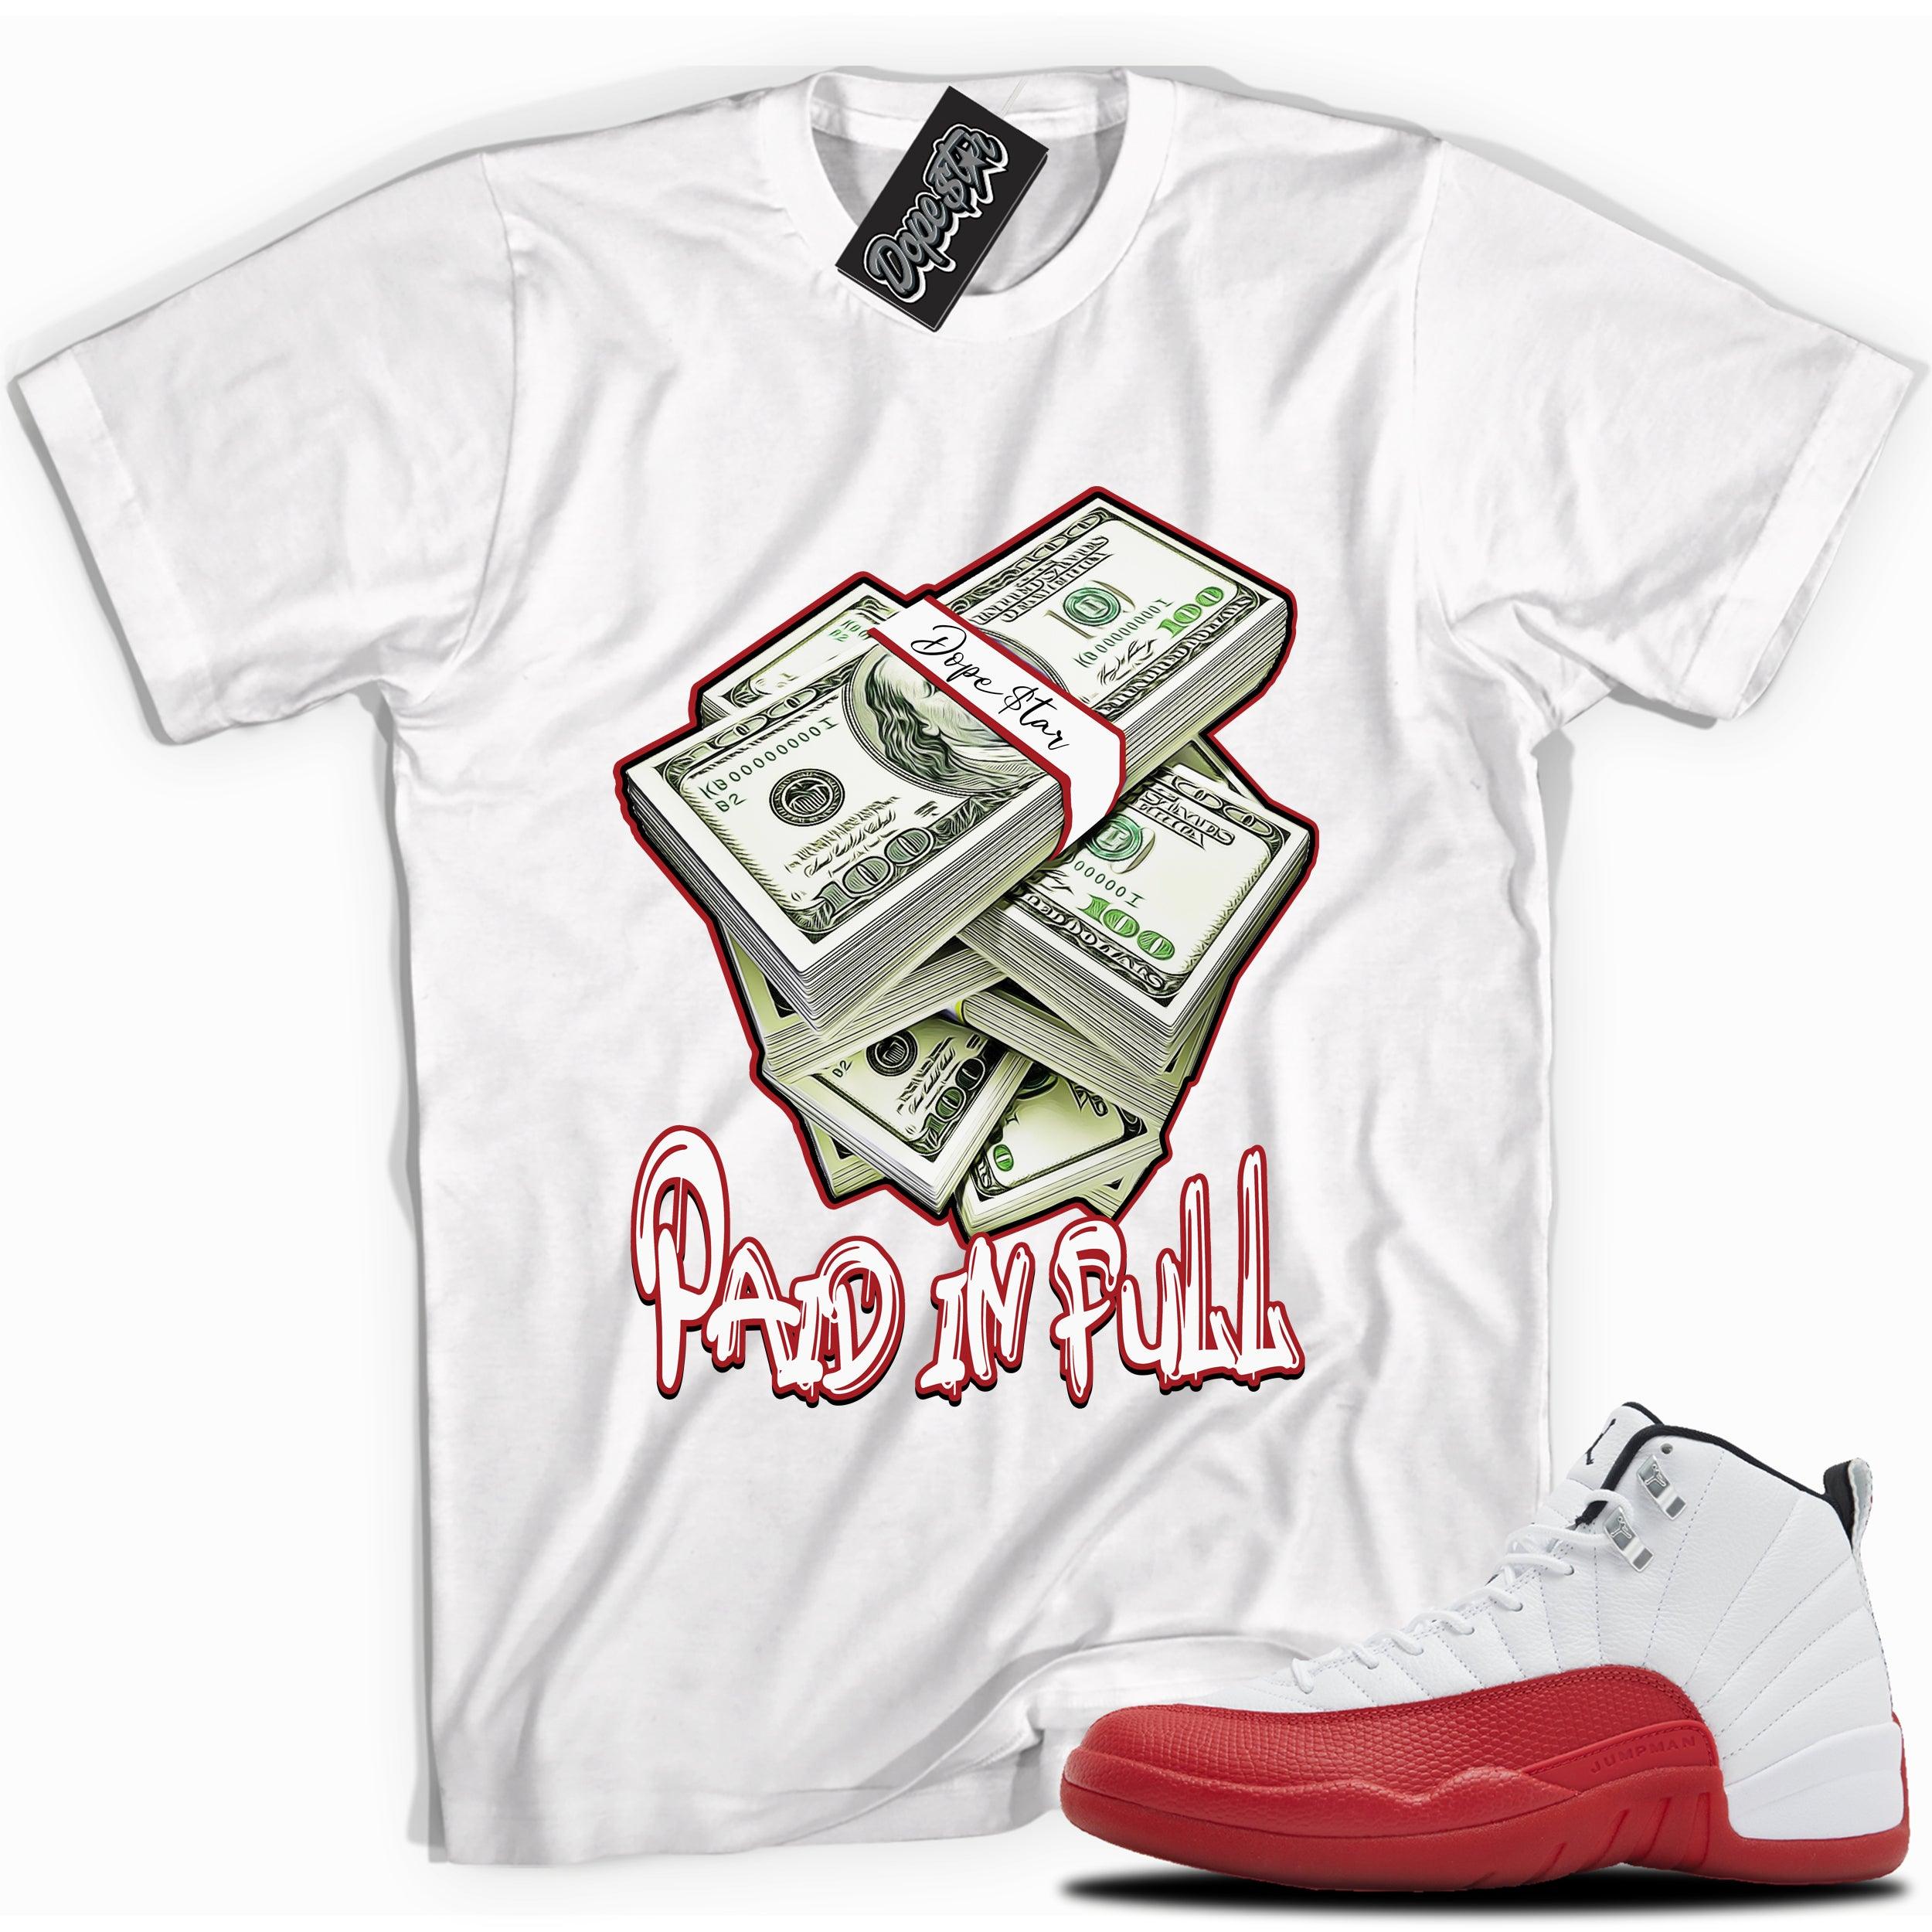 Cool White graphic tee with “PAID IN FULL” print, that perfectly matches Air Jordan 12 Retro Cherry Red 2023 red and white sneakers